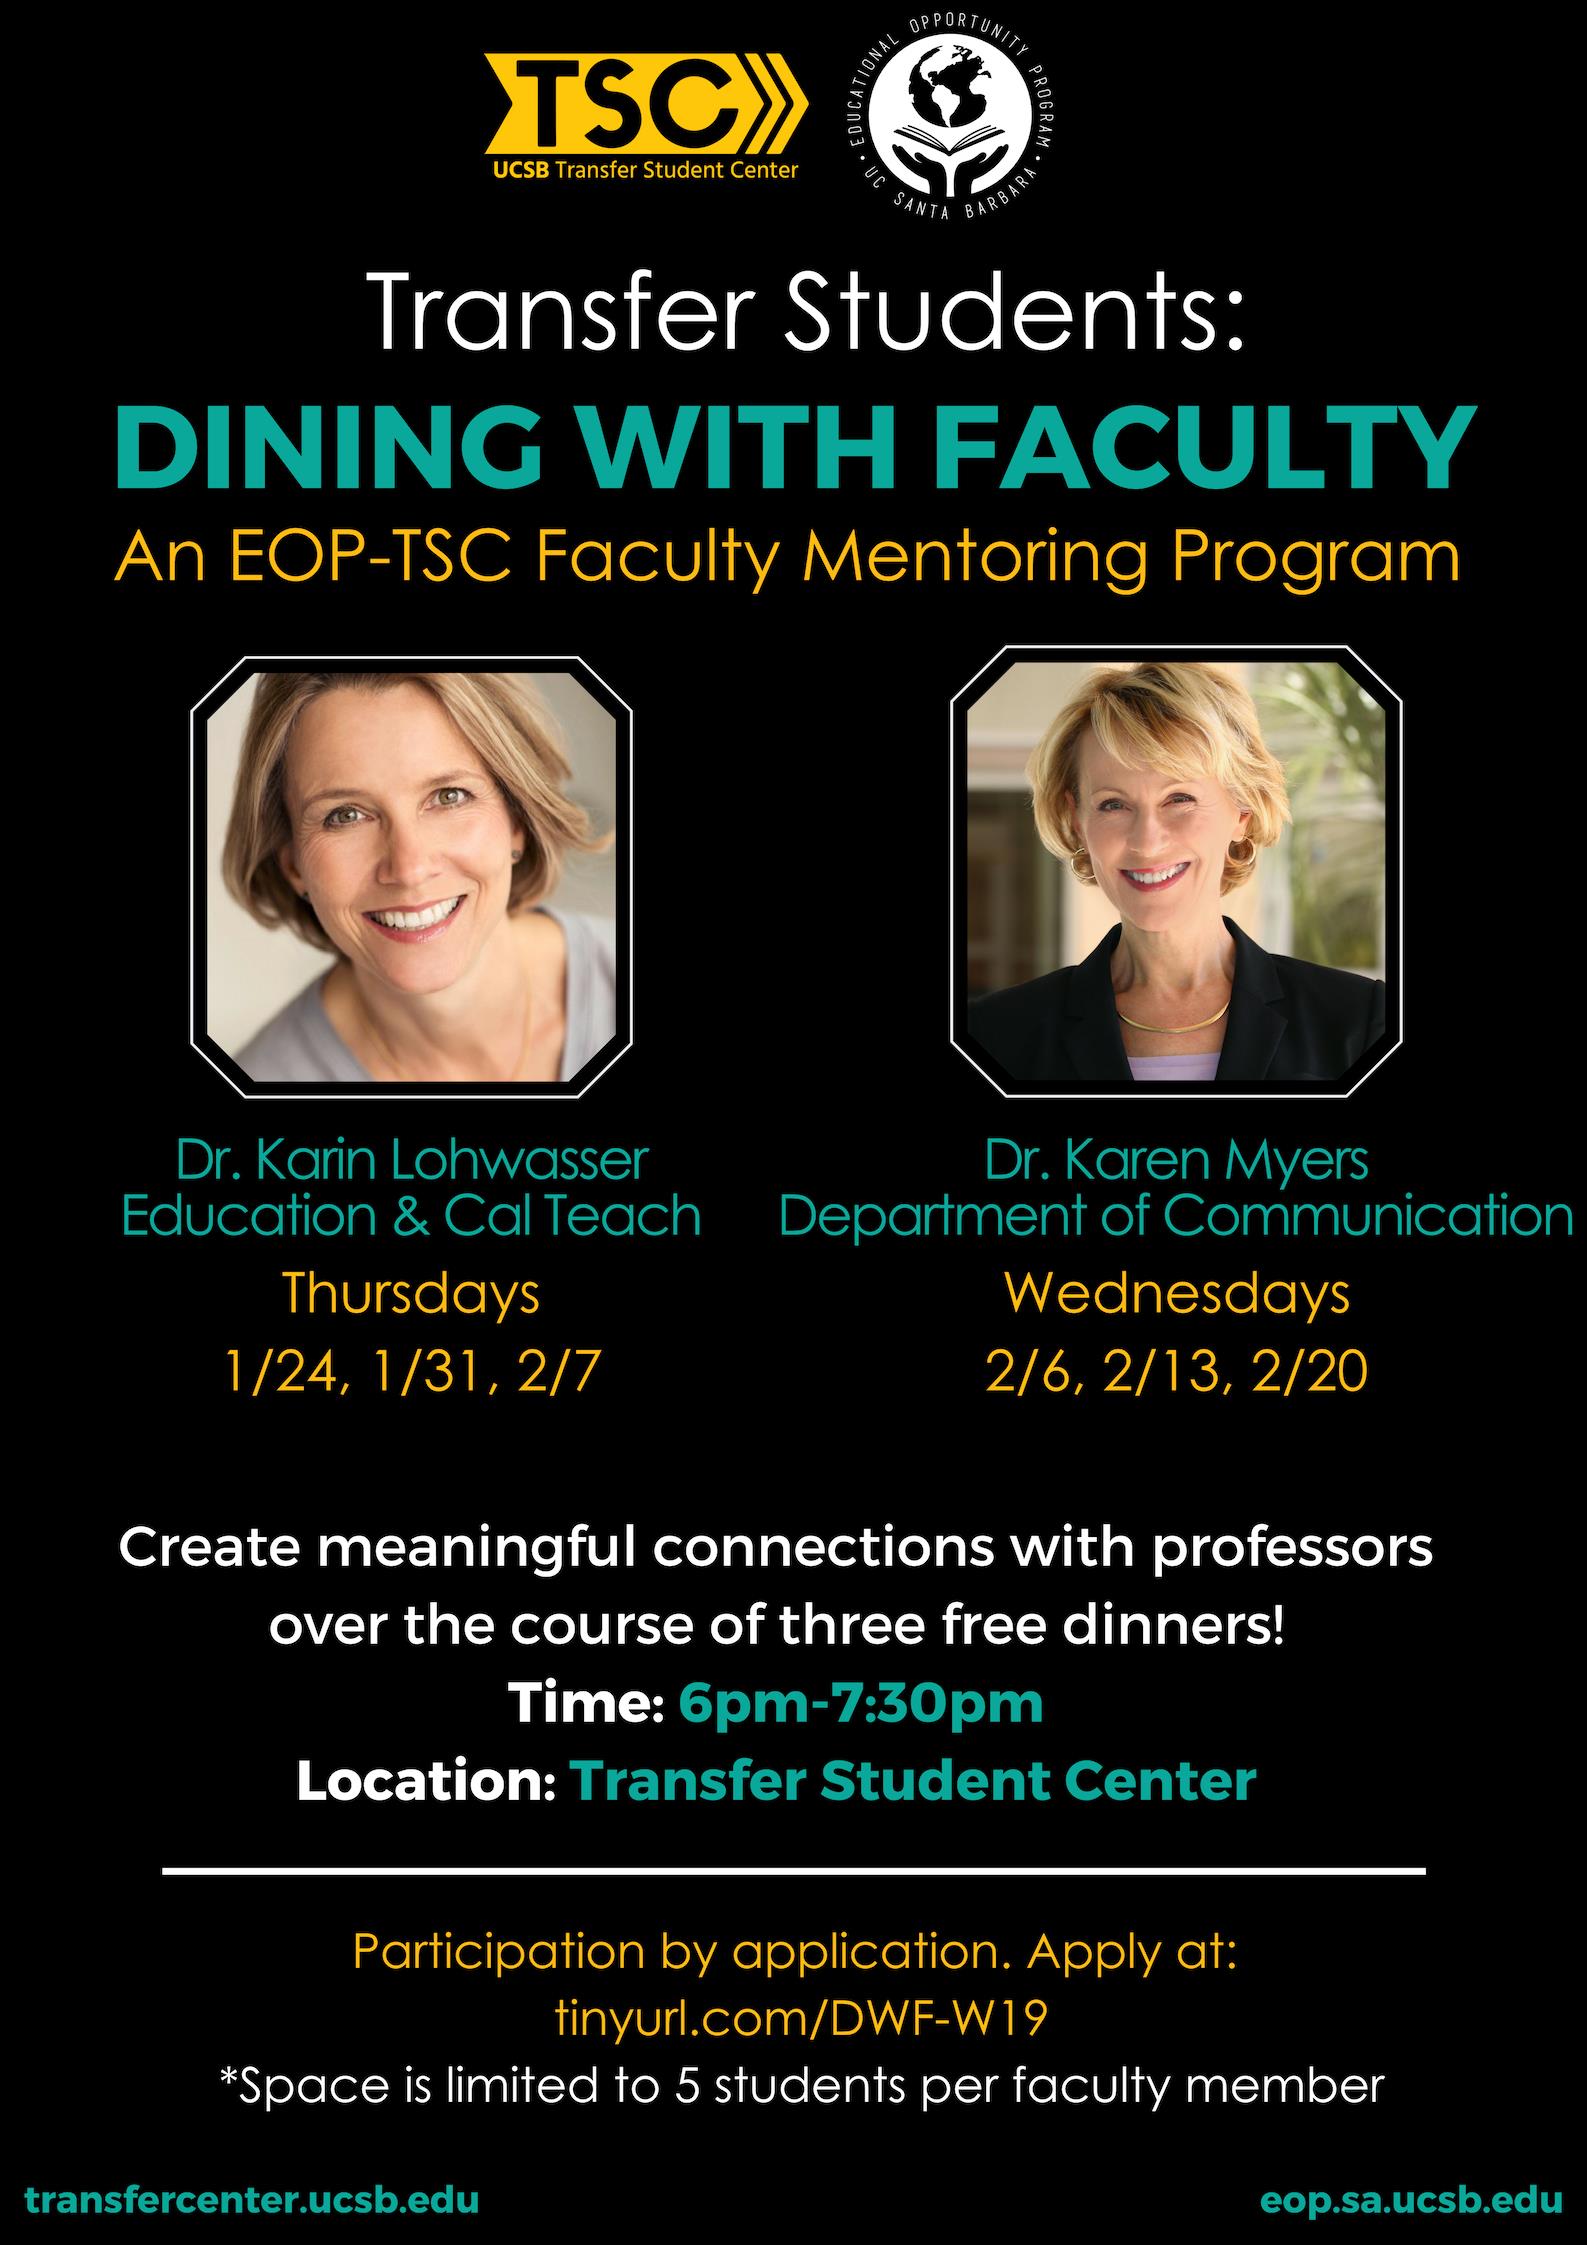 Winter 2019 Dining with Faculty